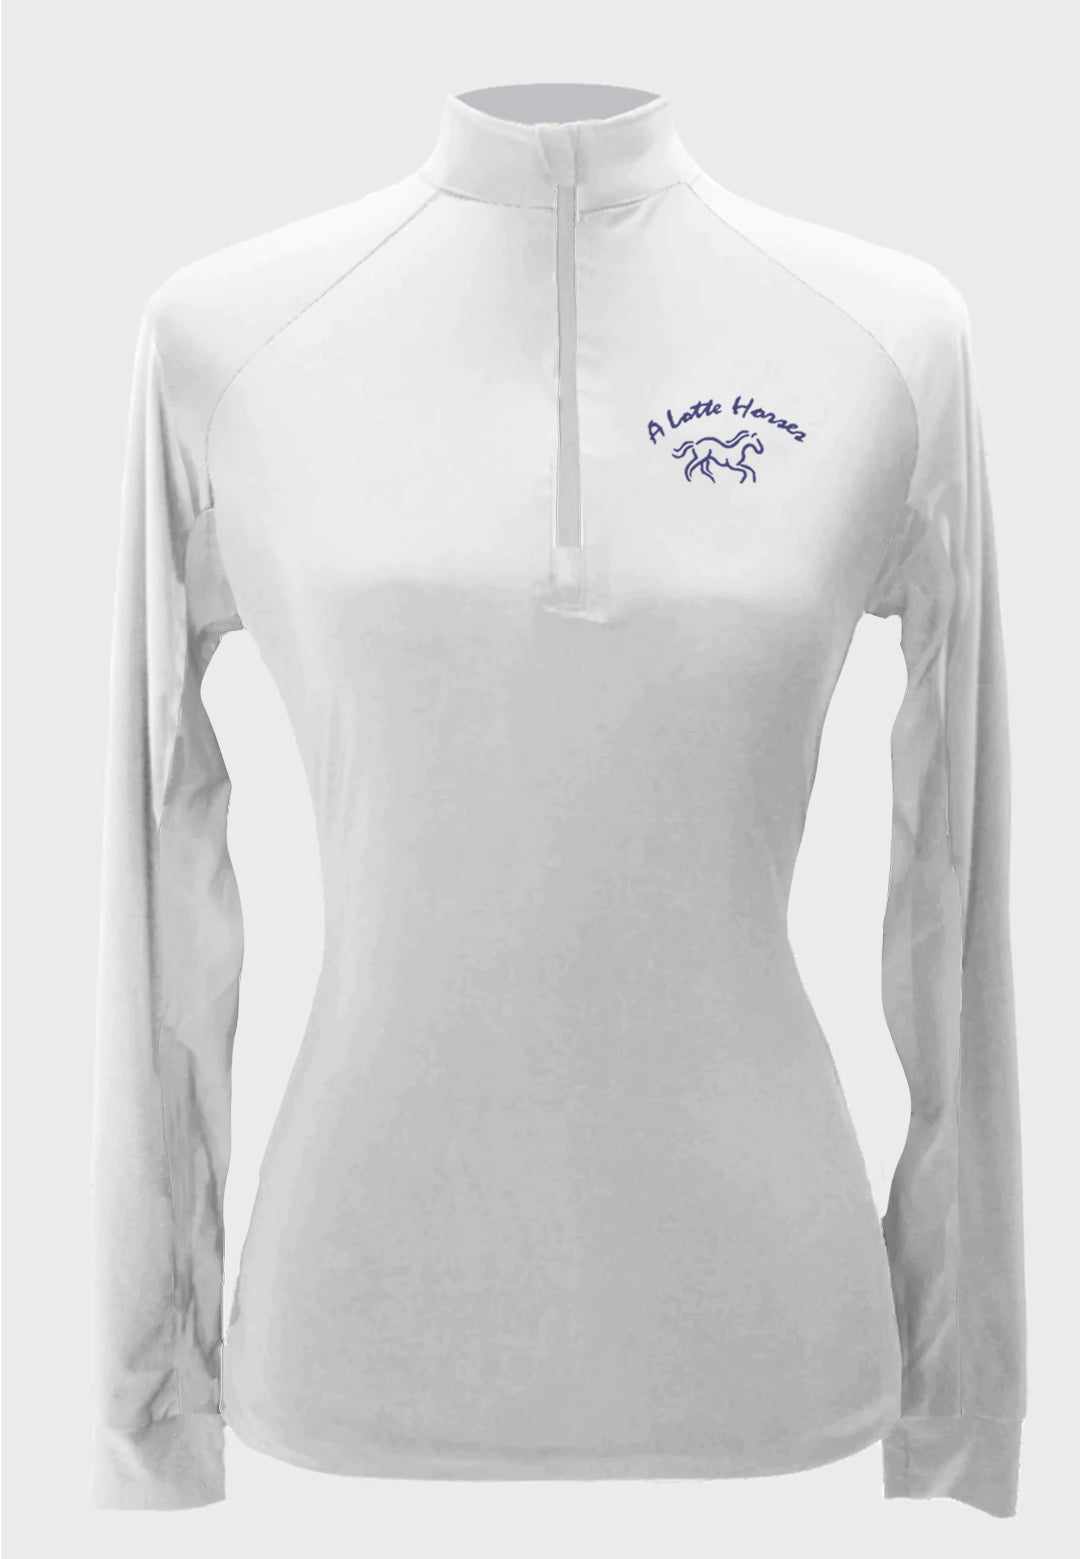 A Lotte Horses White Custom Sun Shirt  - Adult and Youth Sizes